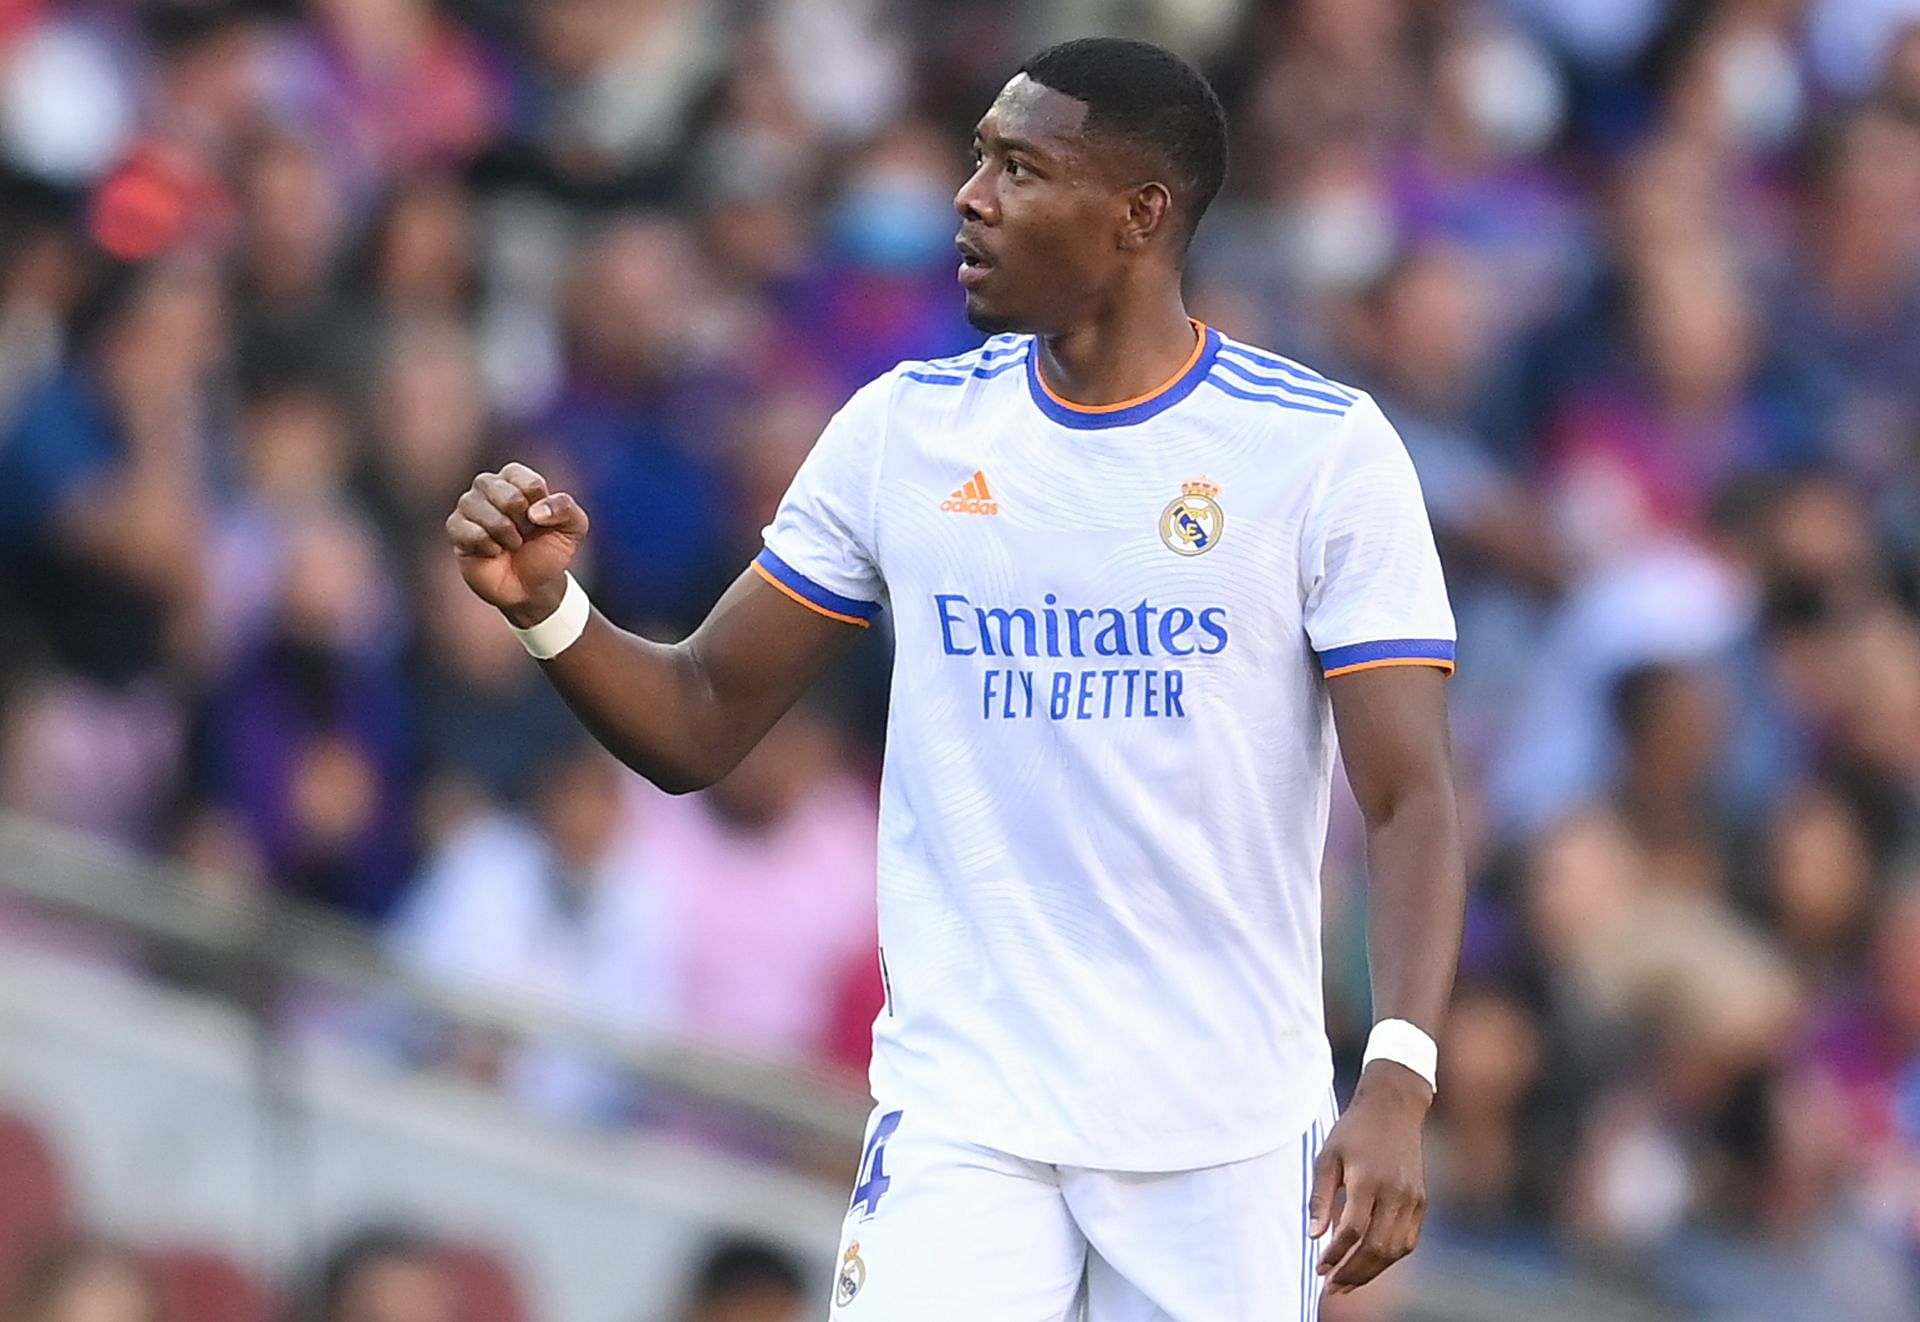 David Alaba is expected to start at centre-back for Real Madrid tonight.